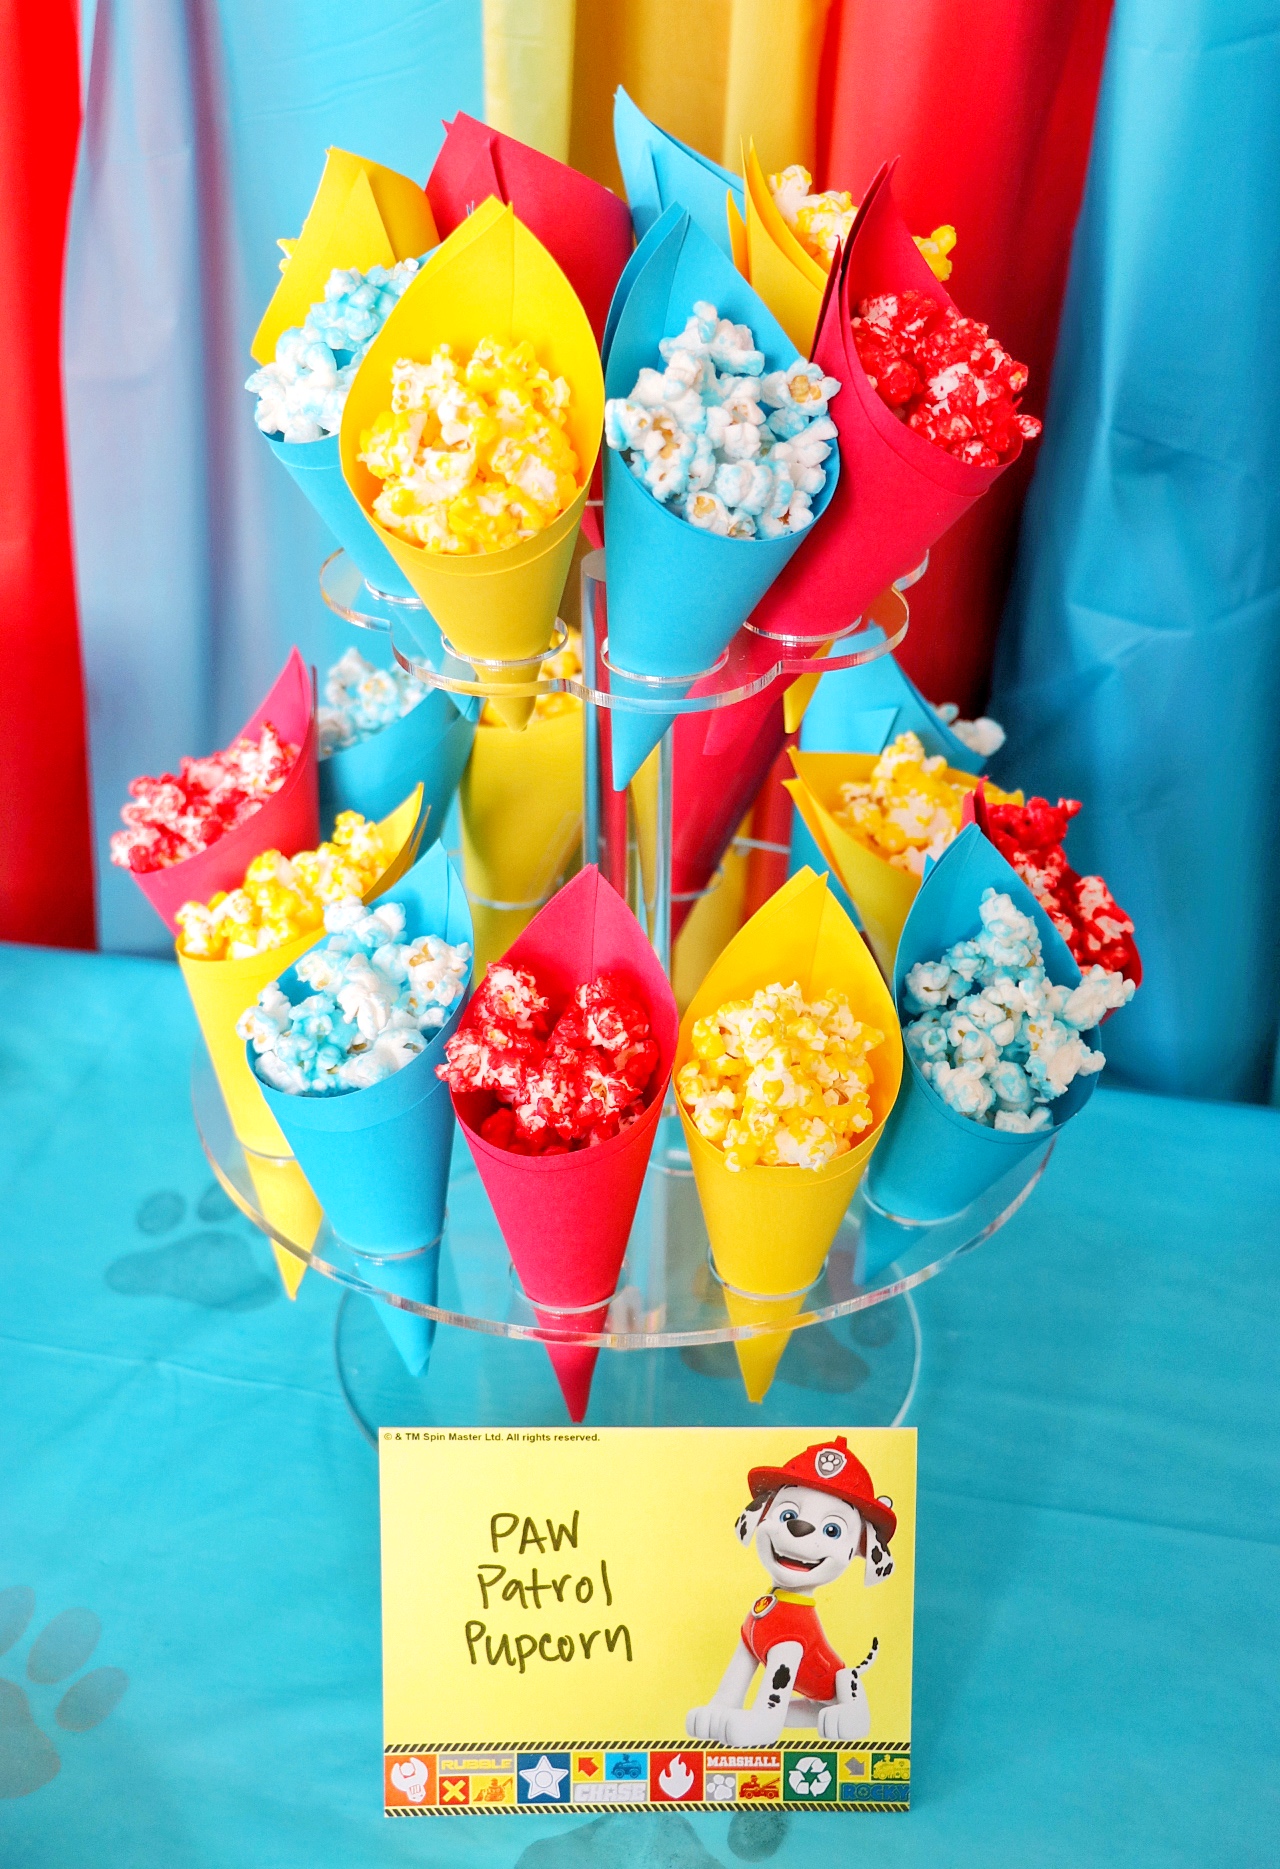 PAW Patrol Party Ideas Food Decorations Games And Free Printables 